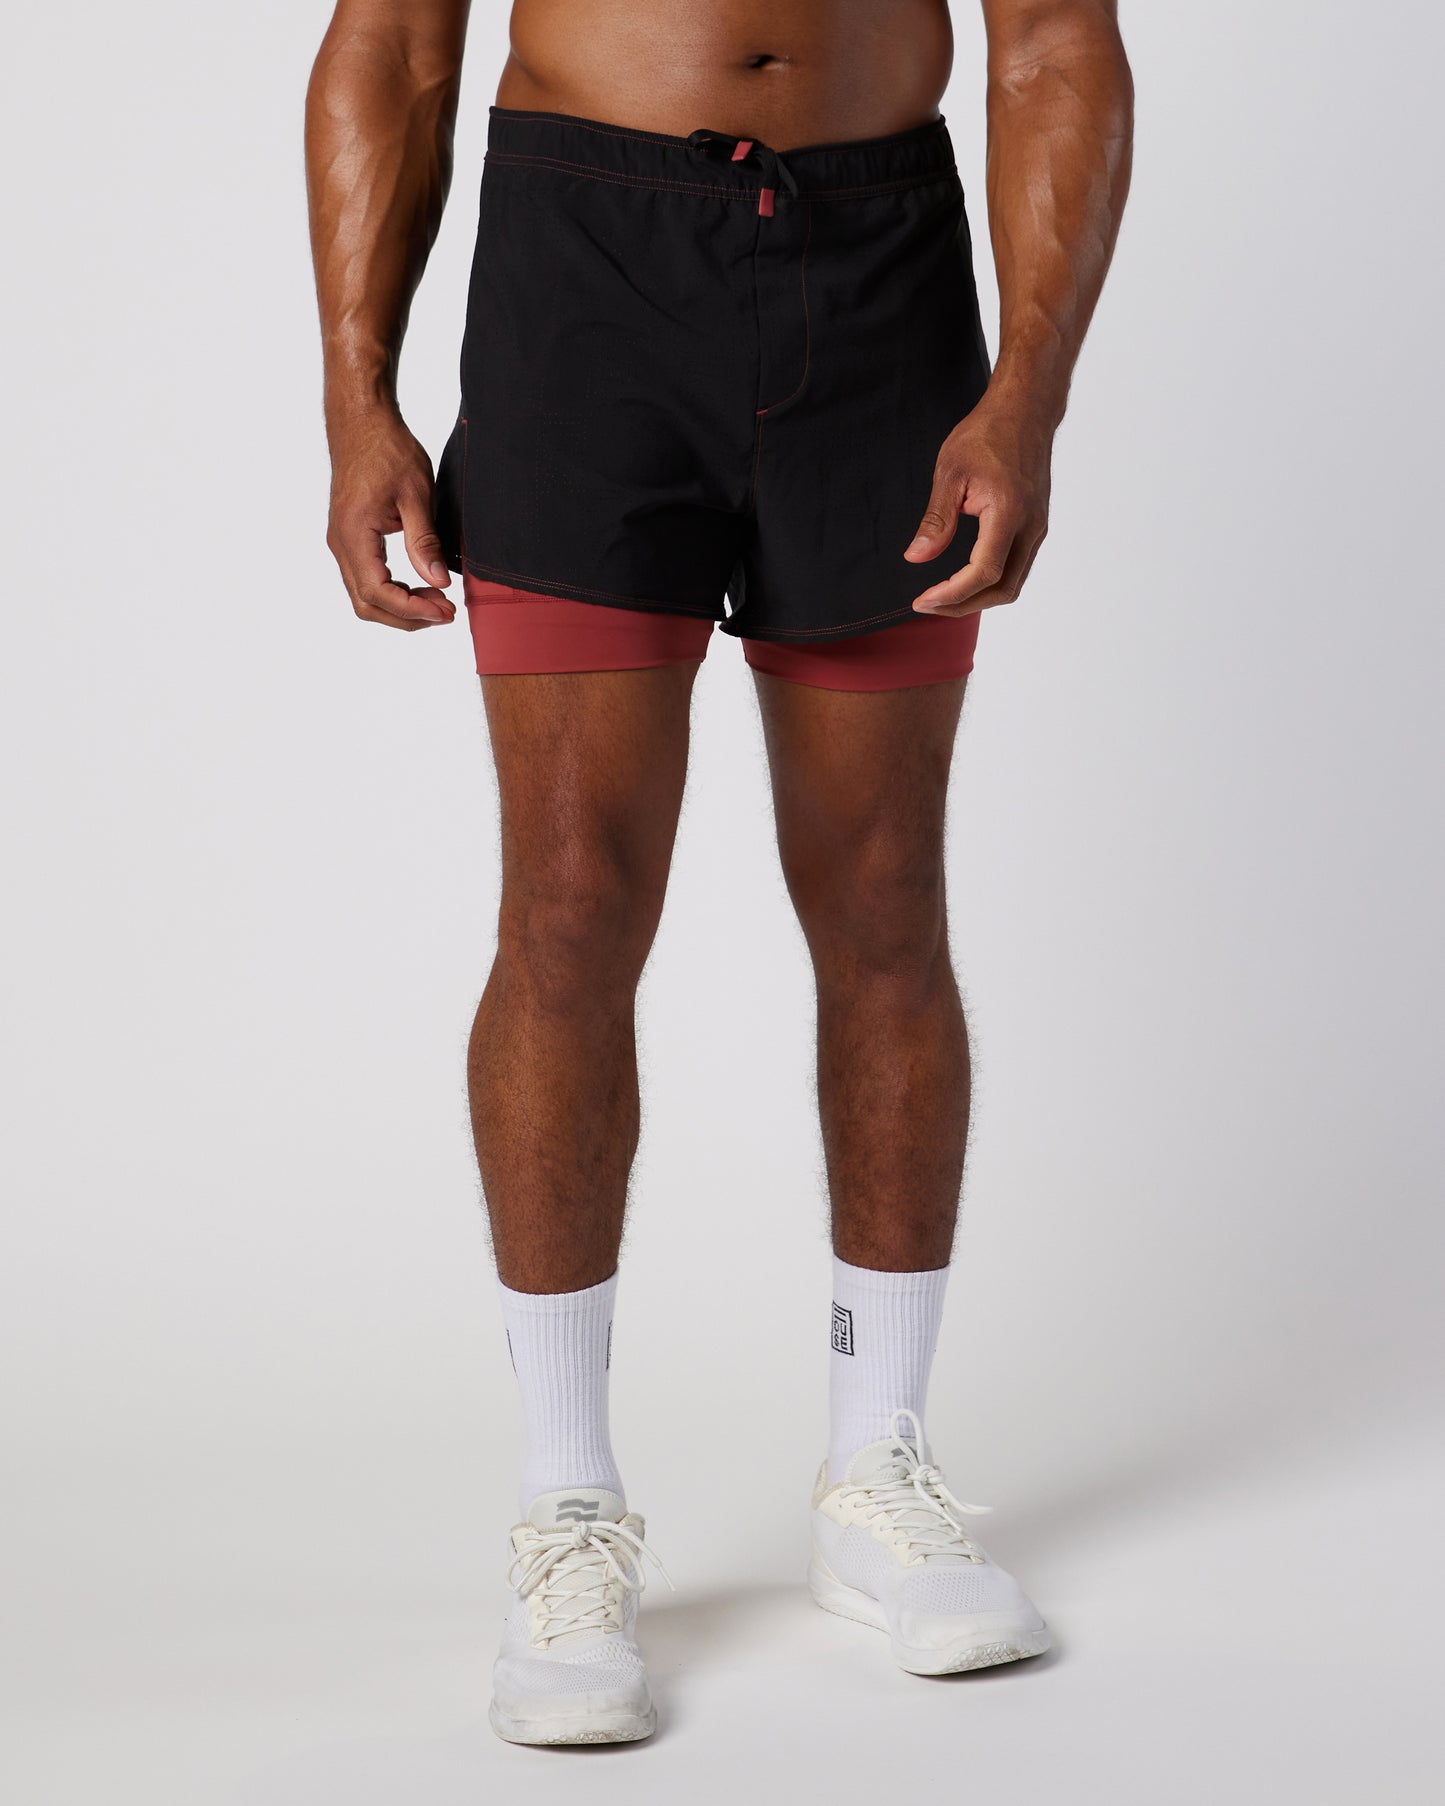 Mens Sports shorts in black and red